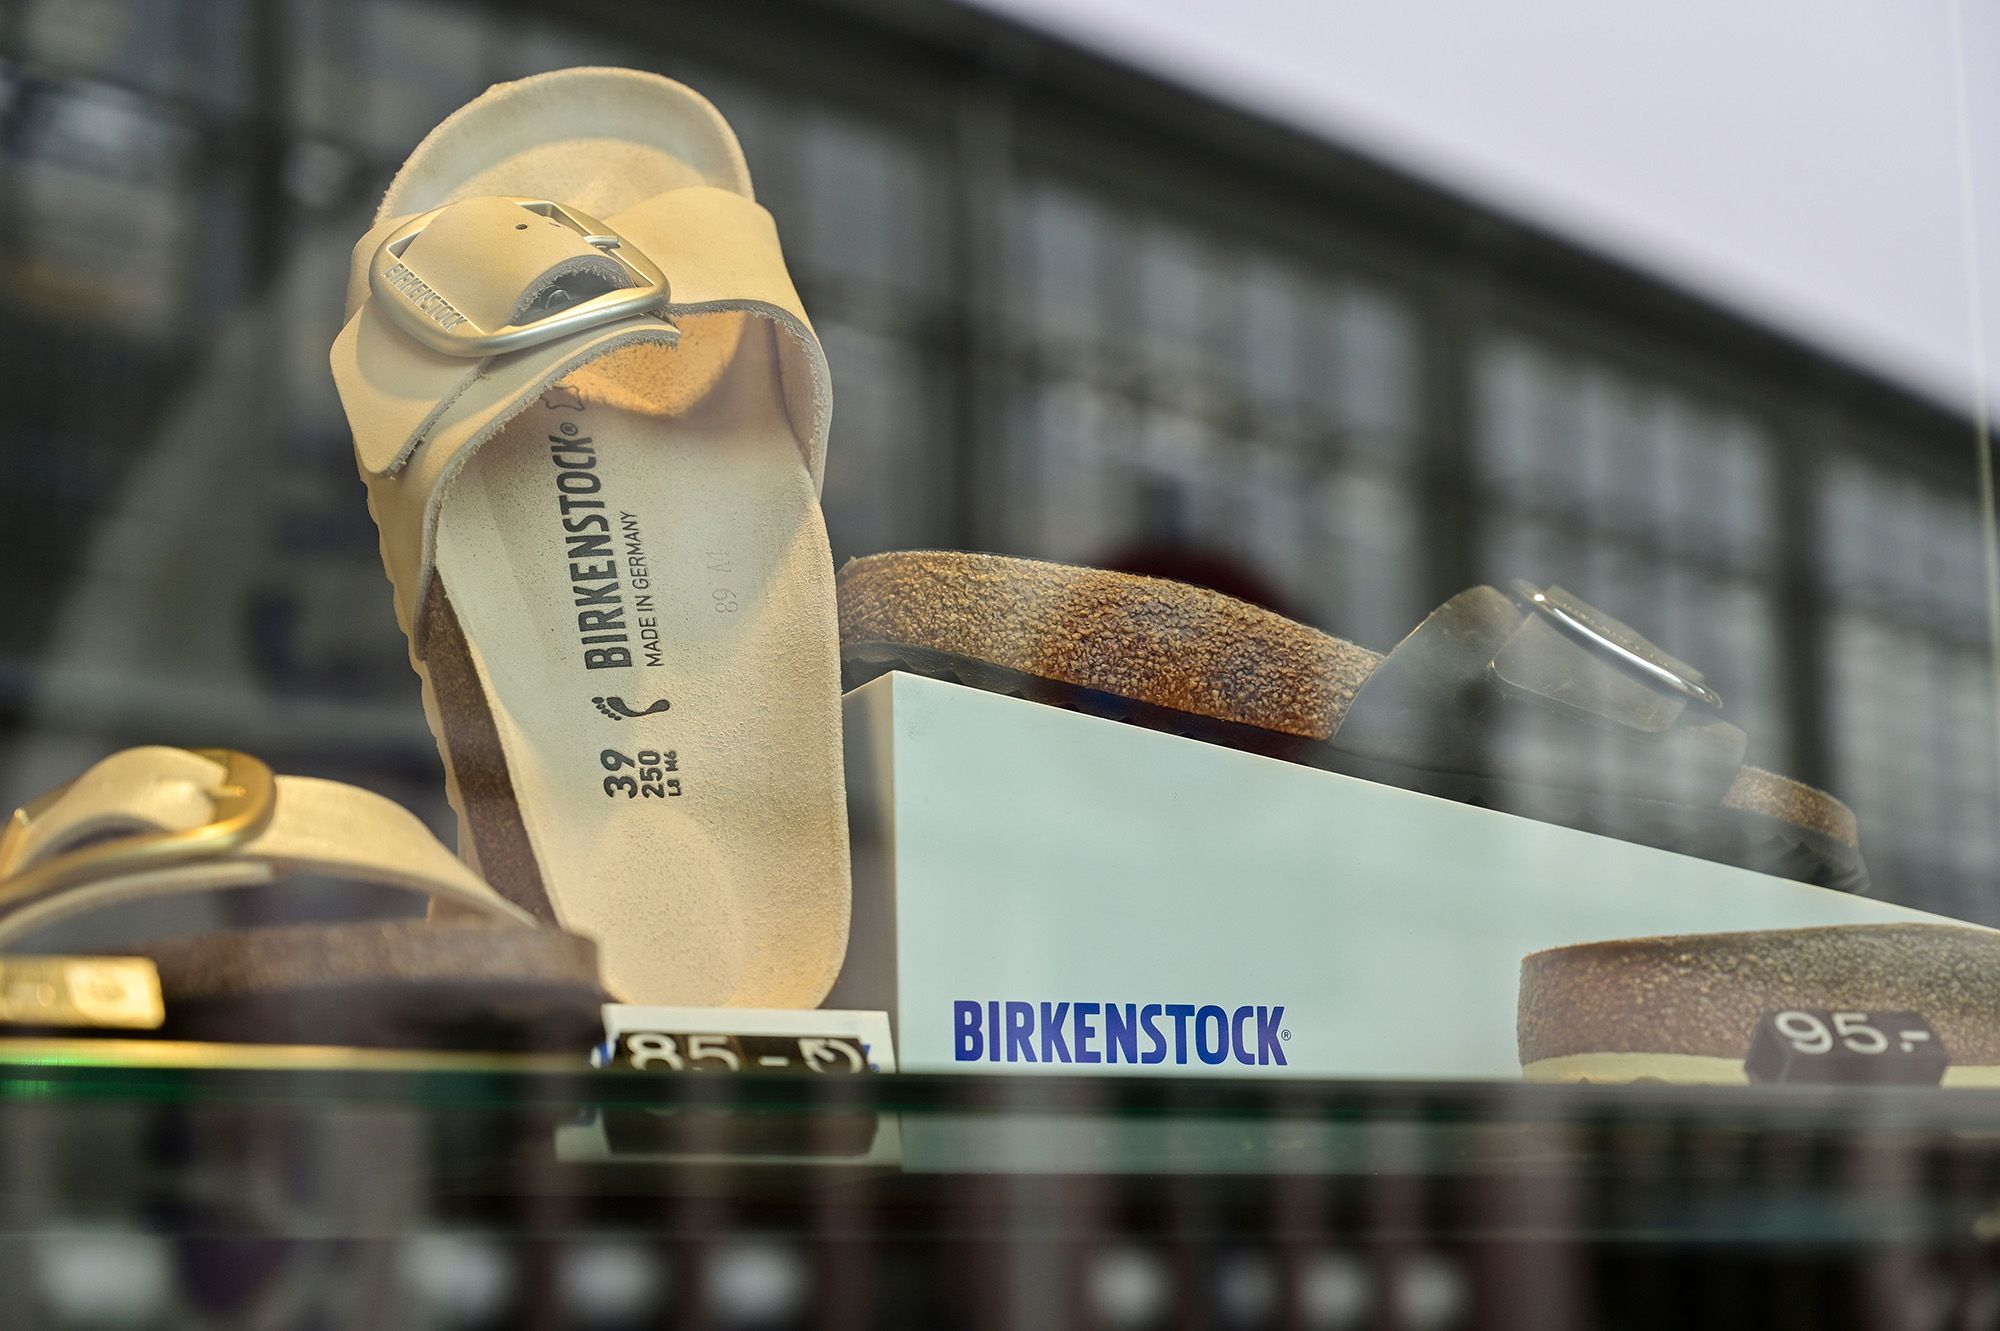 The reasons why, among many, Birkenstock chose L Catterton